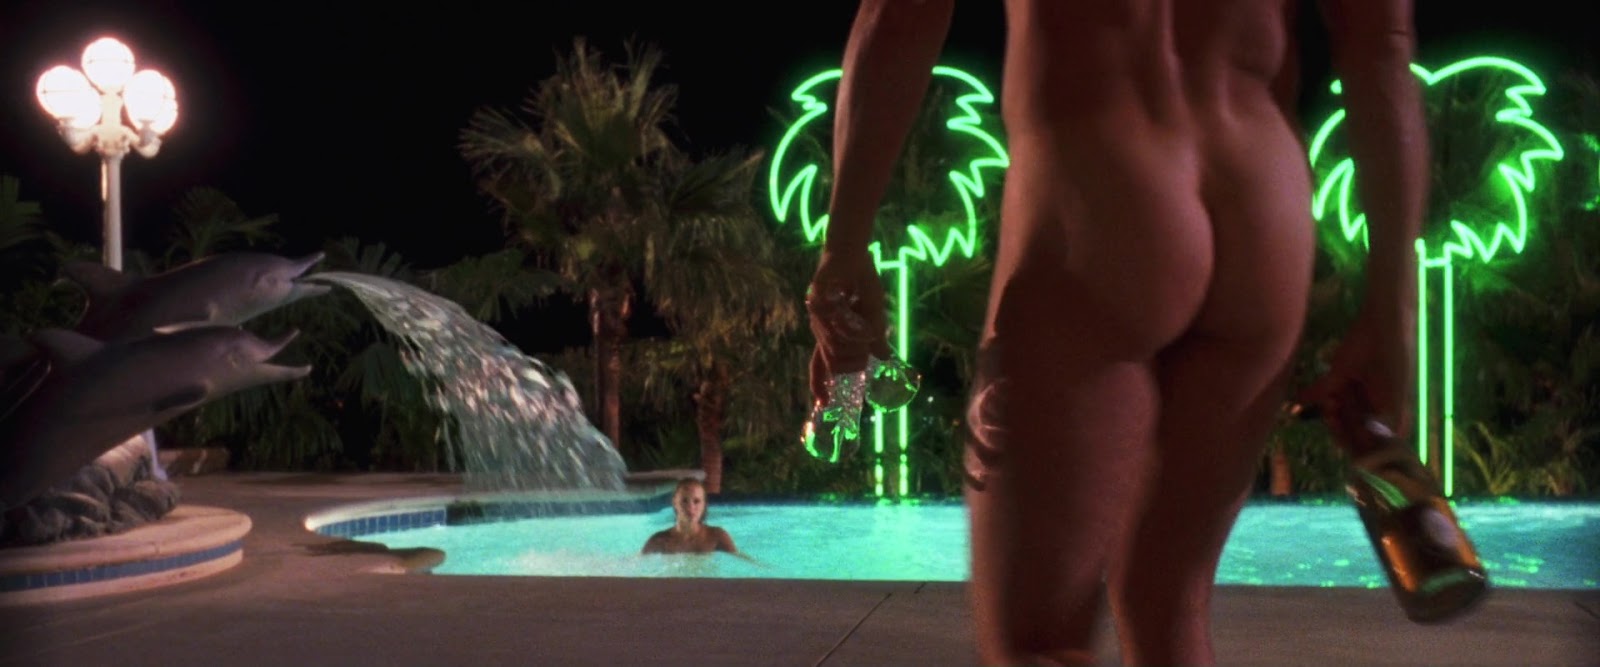 ausCAPS: Kyle MacLachlan nude in Showgirls